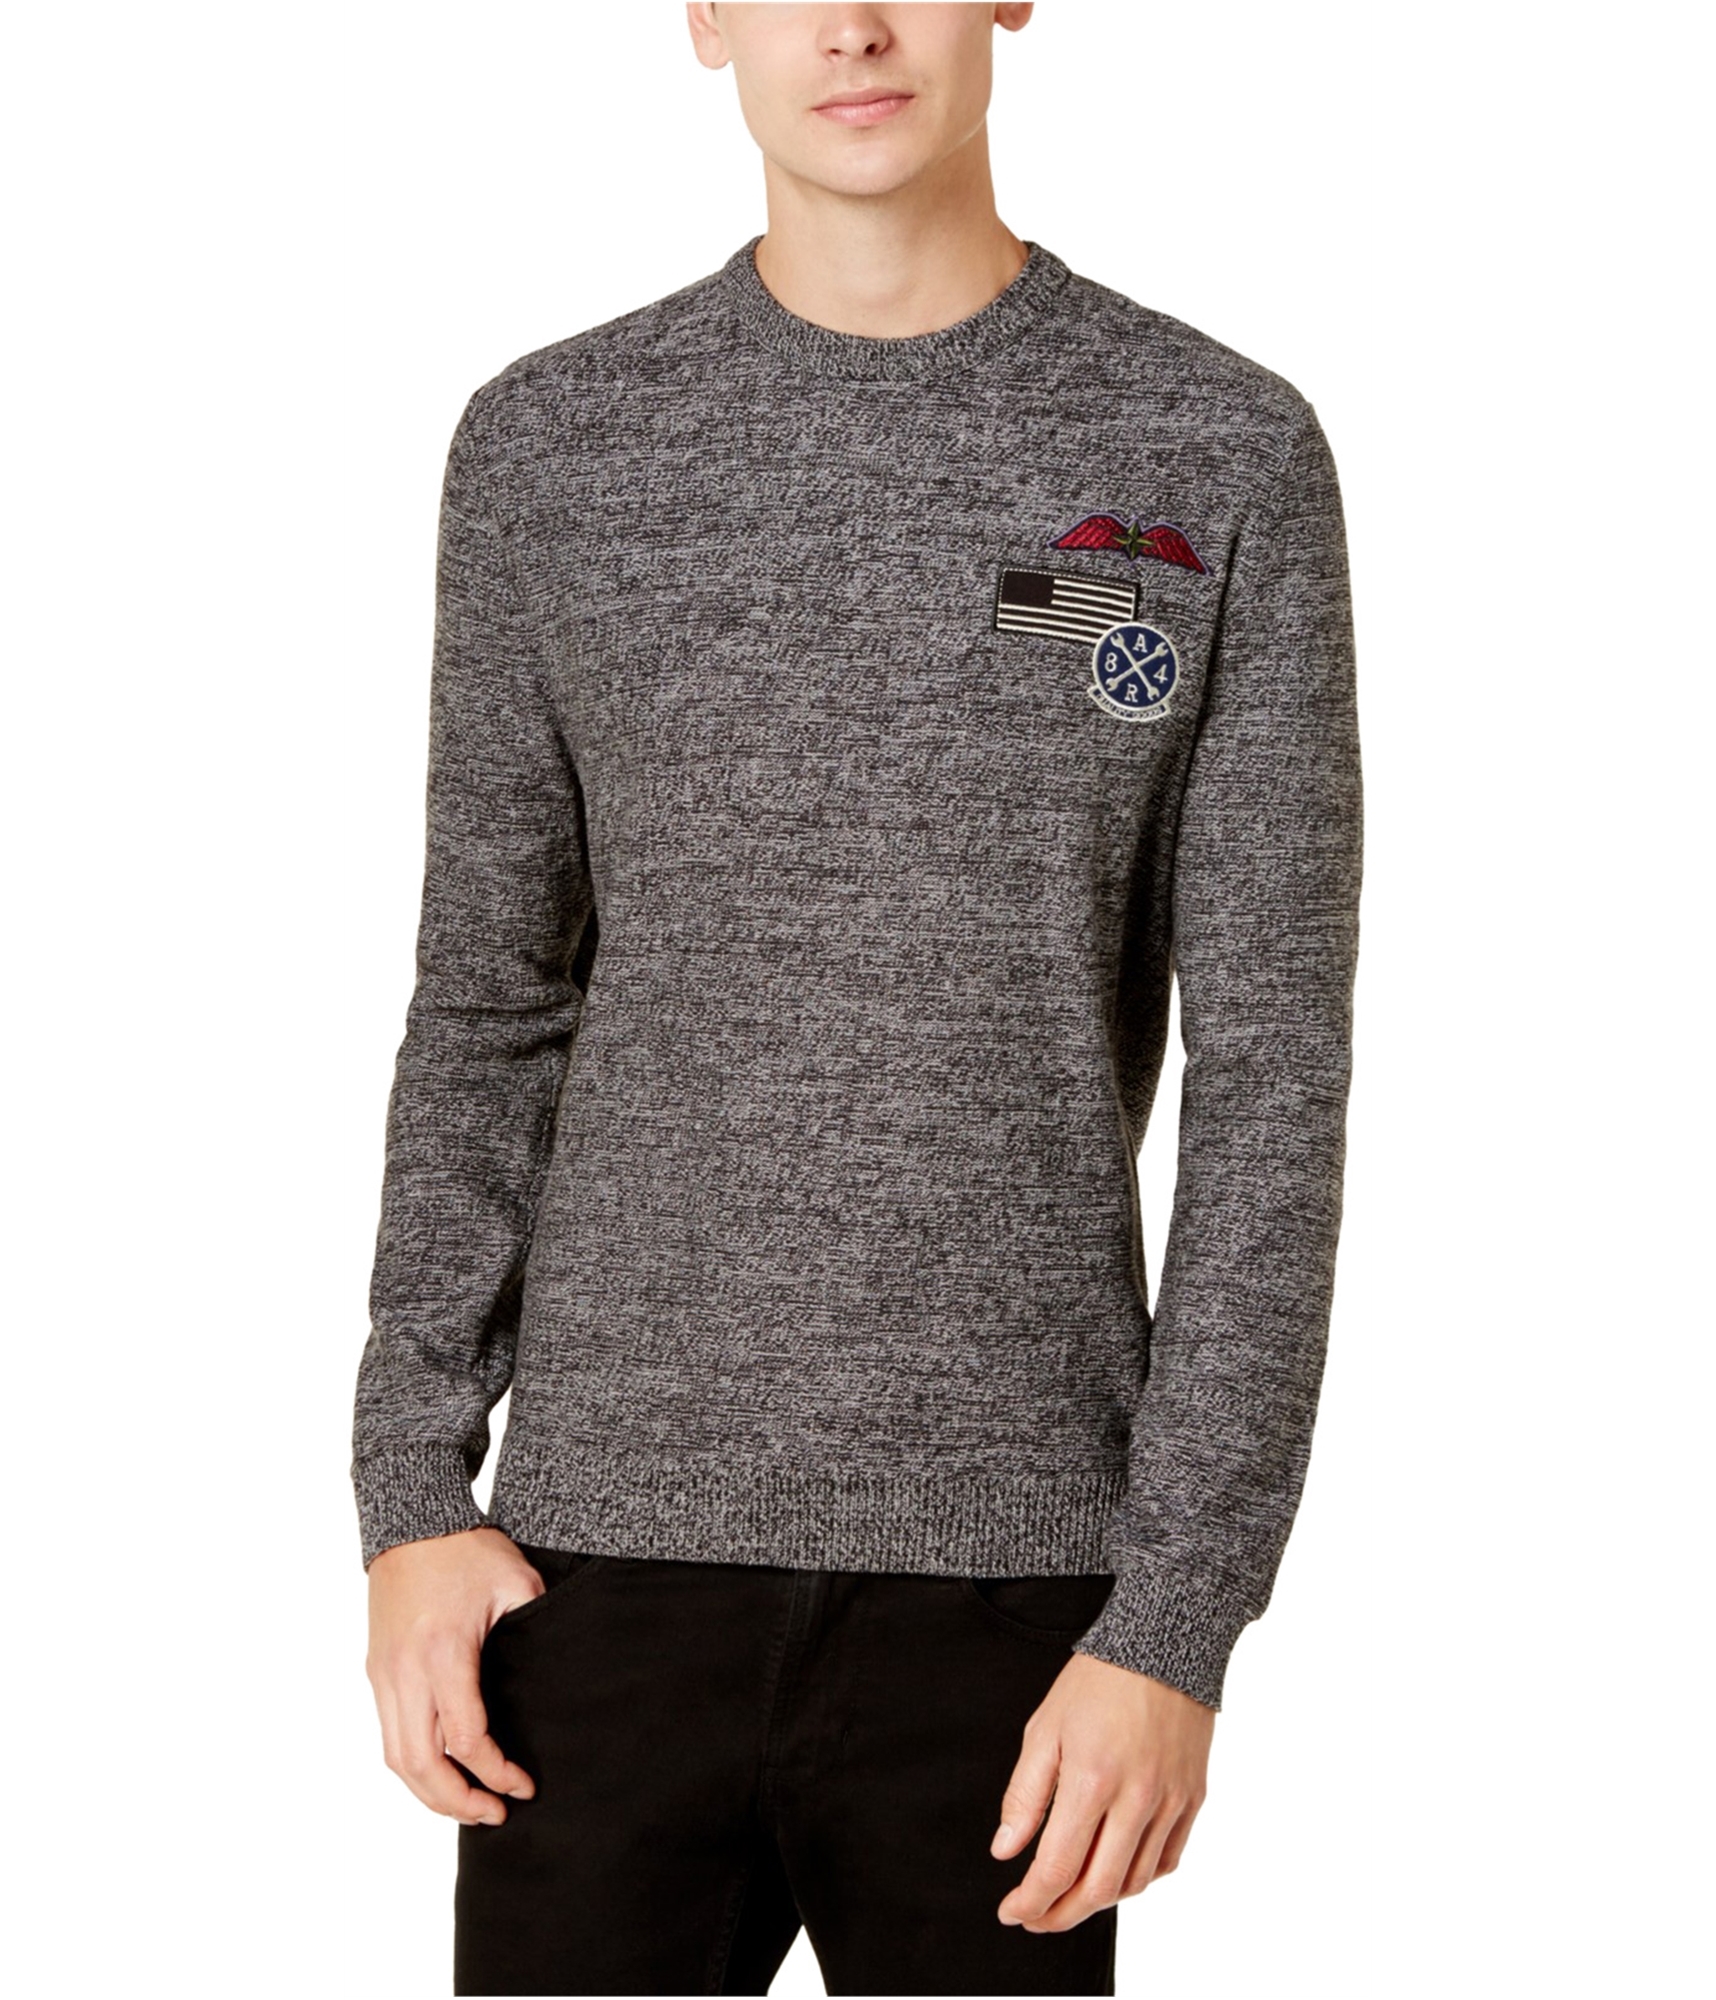 American Rag Mens Patched Pullover Sweater | TagsWeekly.com